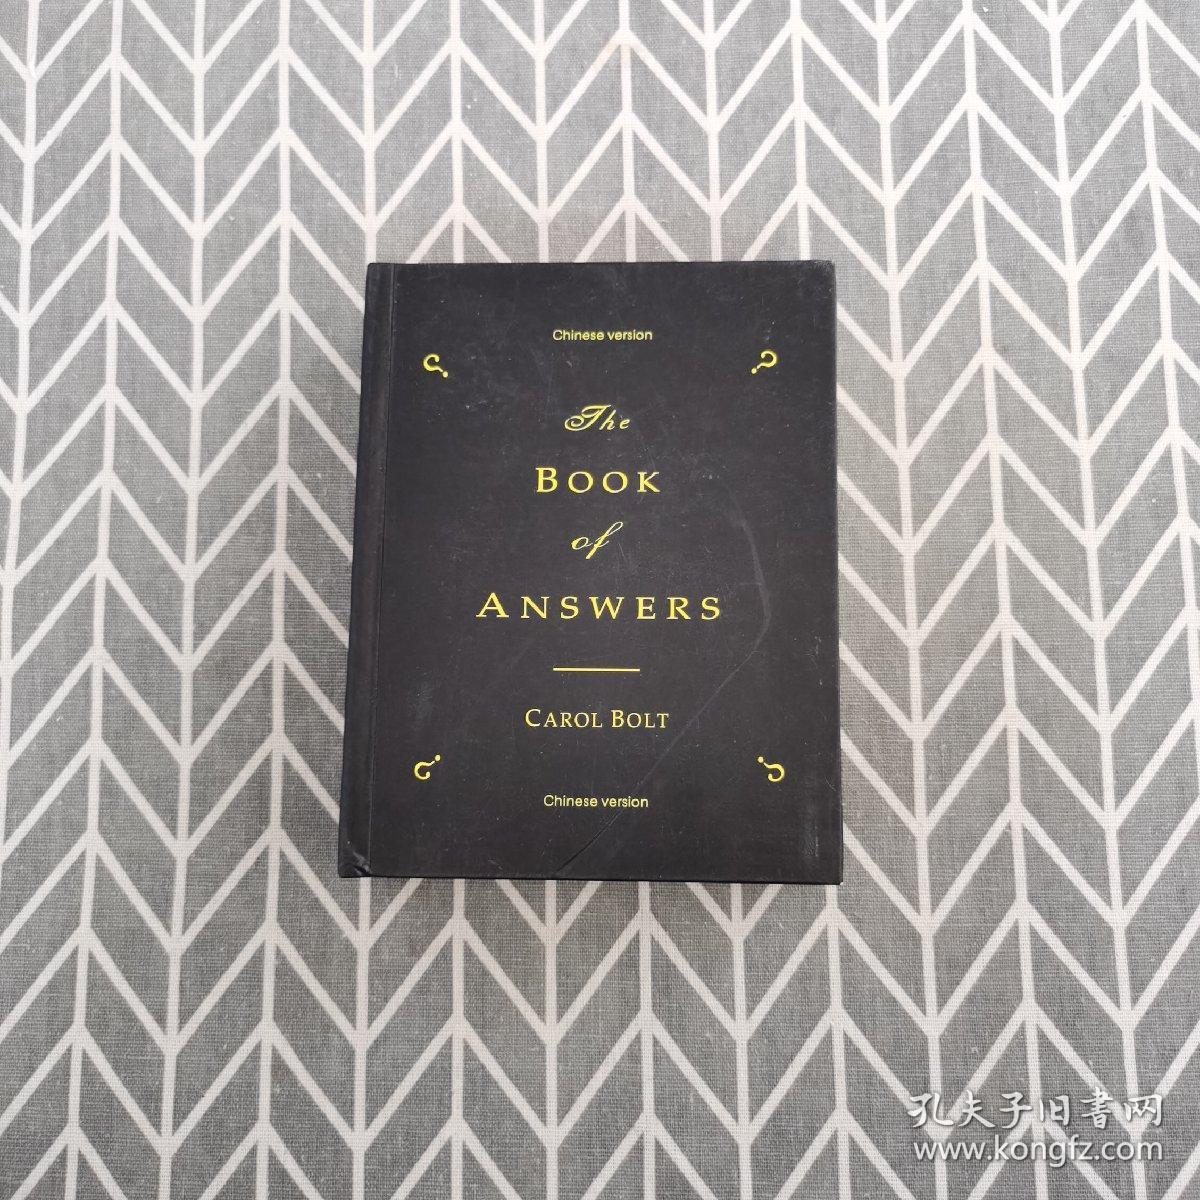 THE BOOK OF ANSWERS